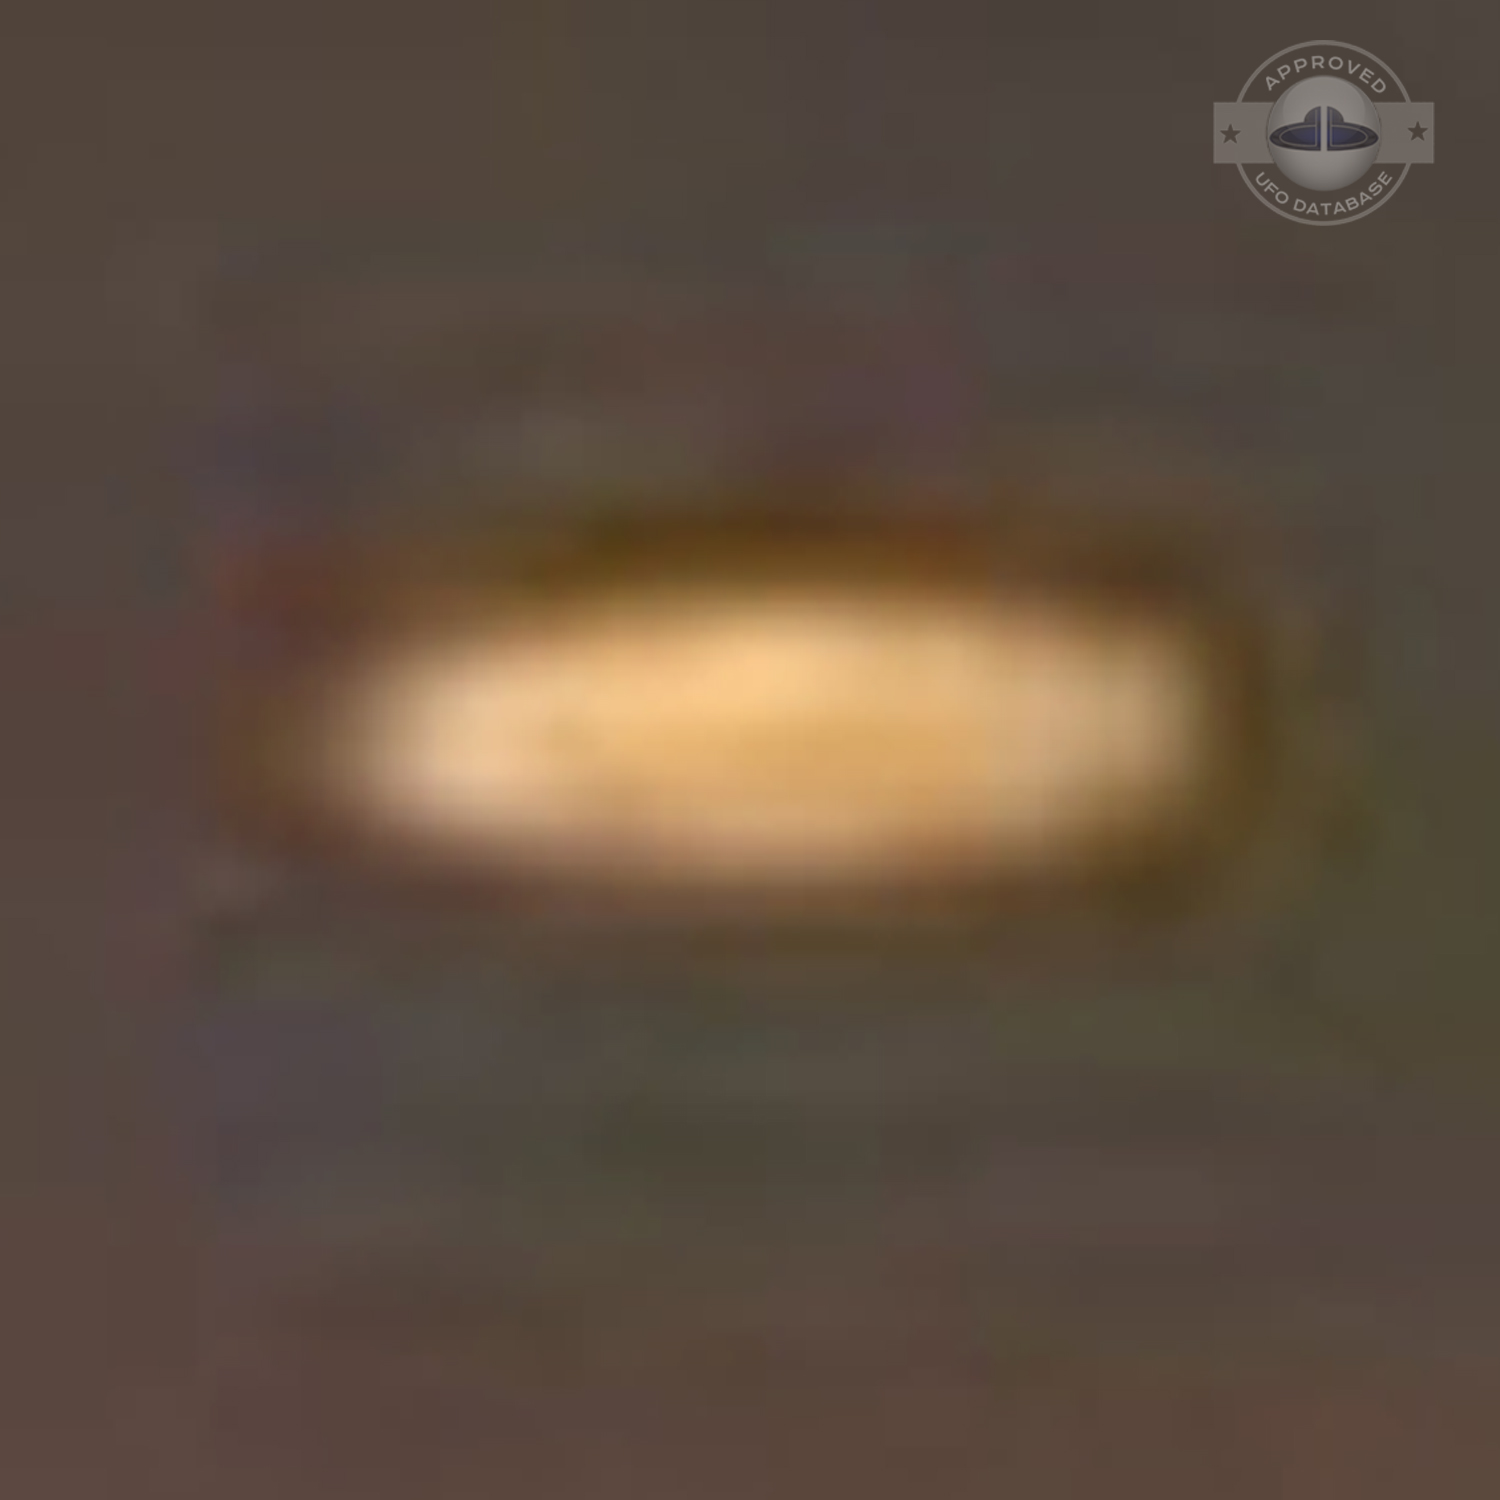 UFO picture showing a bright flat round disc passing near a building UFO Picture #54-6